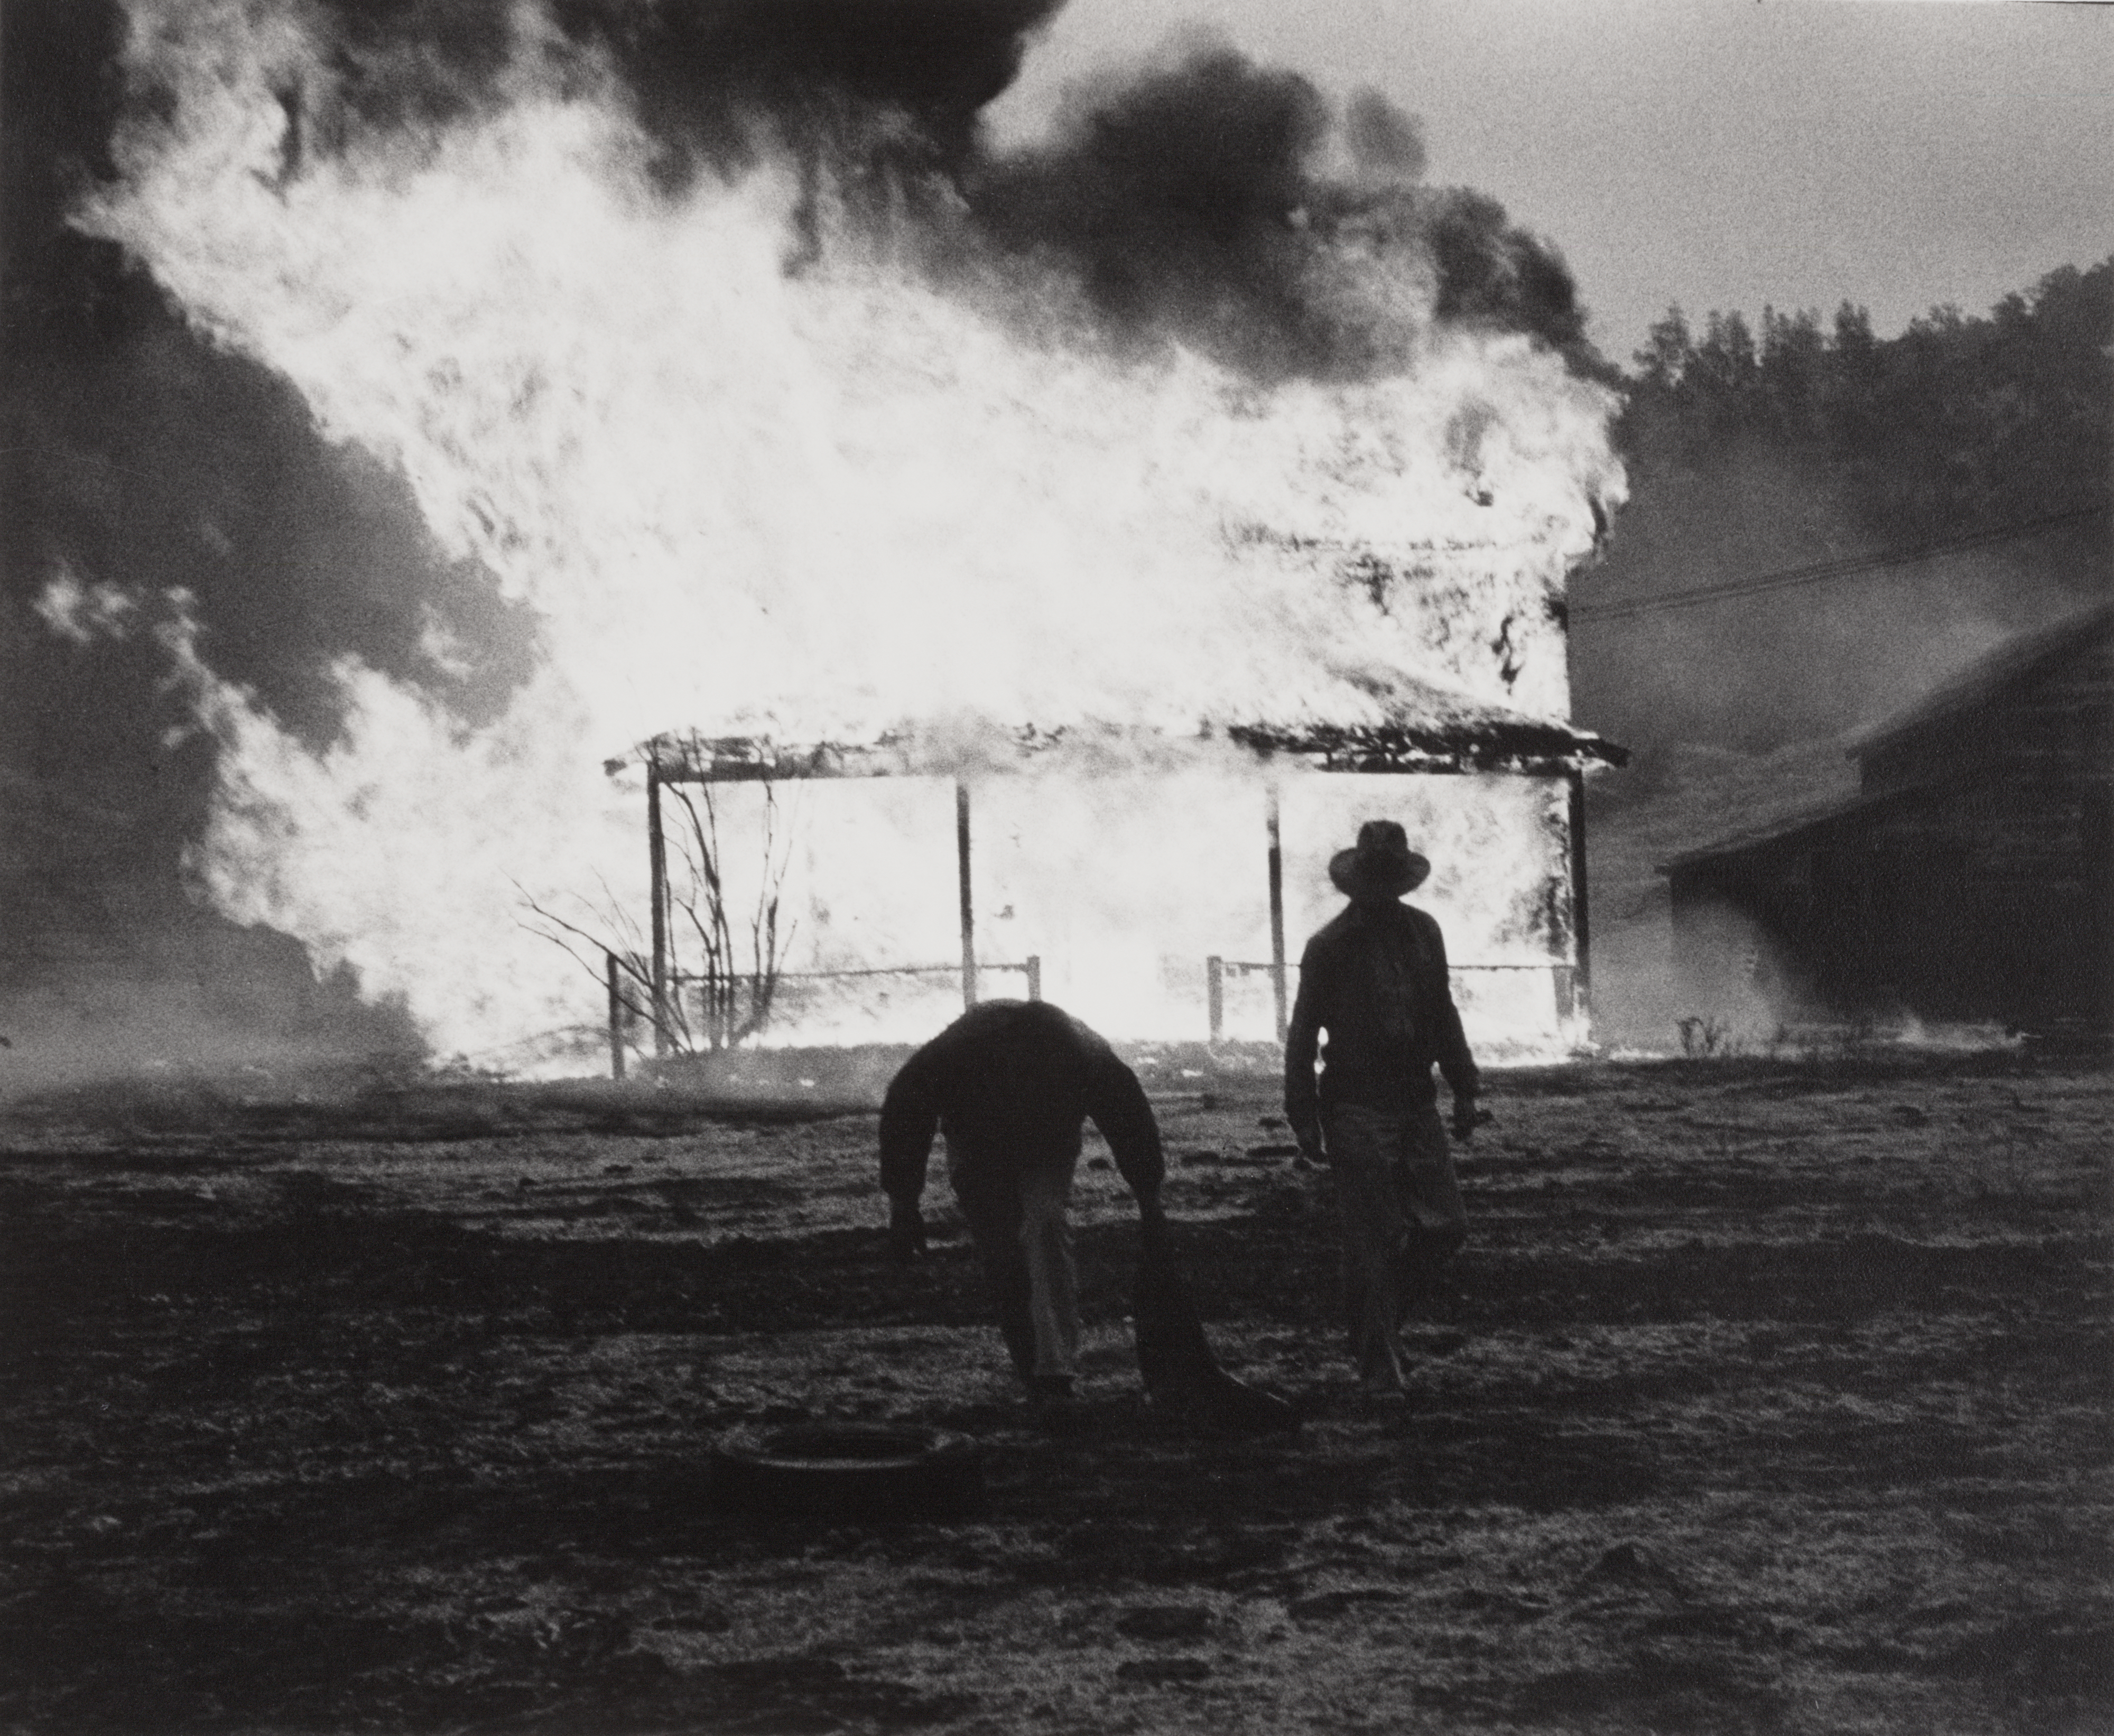 Fire is Part of the Demolition Process, Berryessa Valley, from the series Death of a Valley